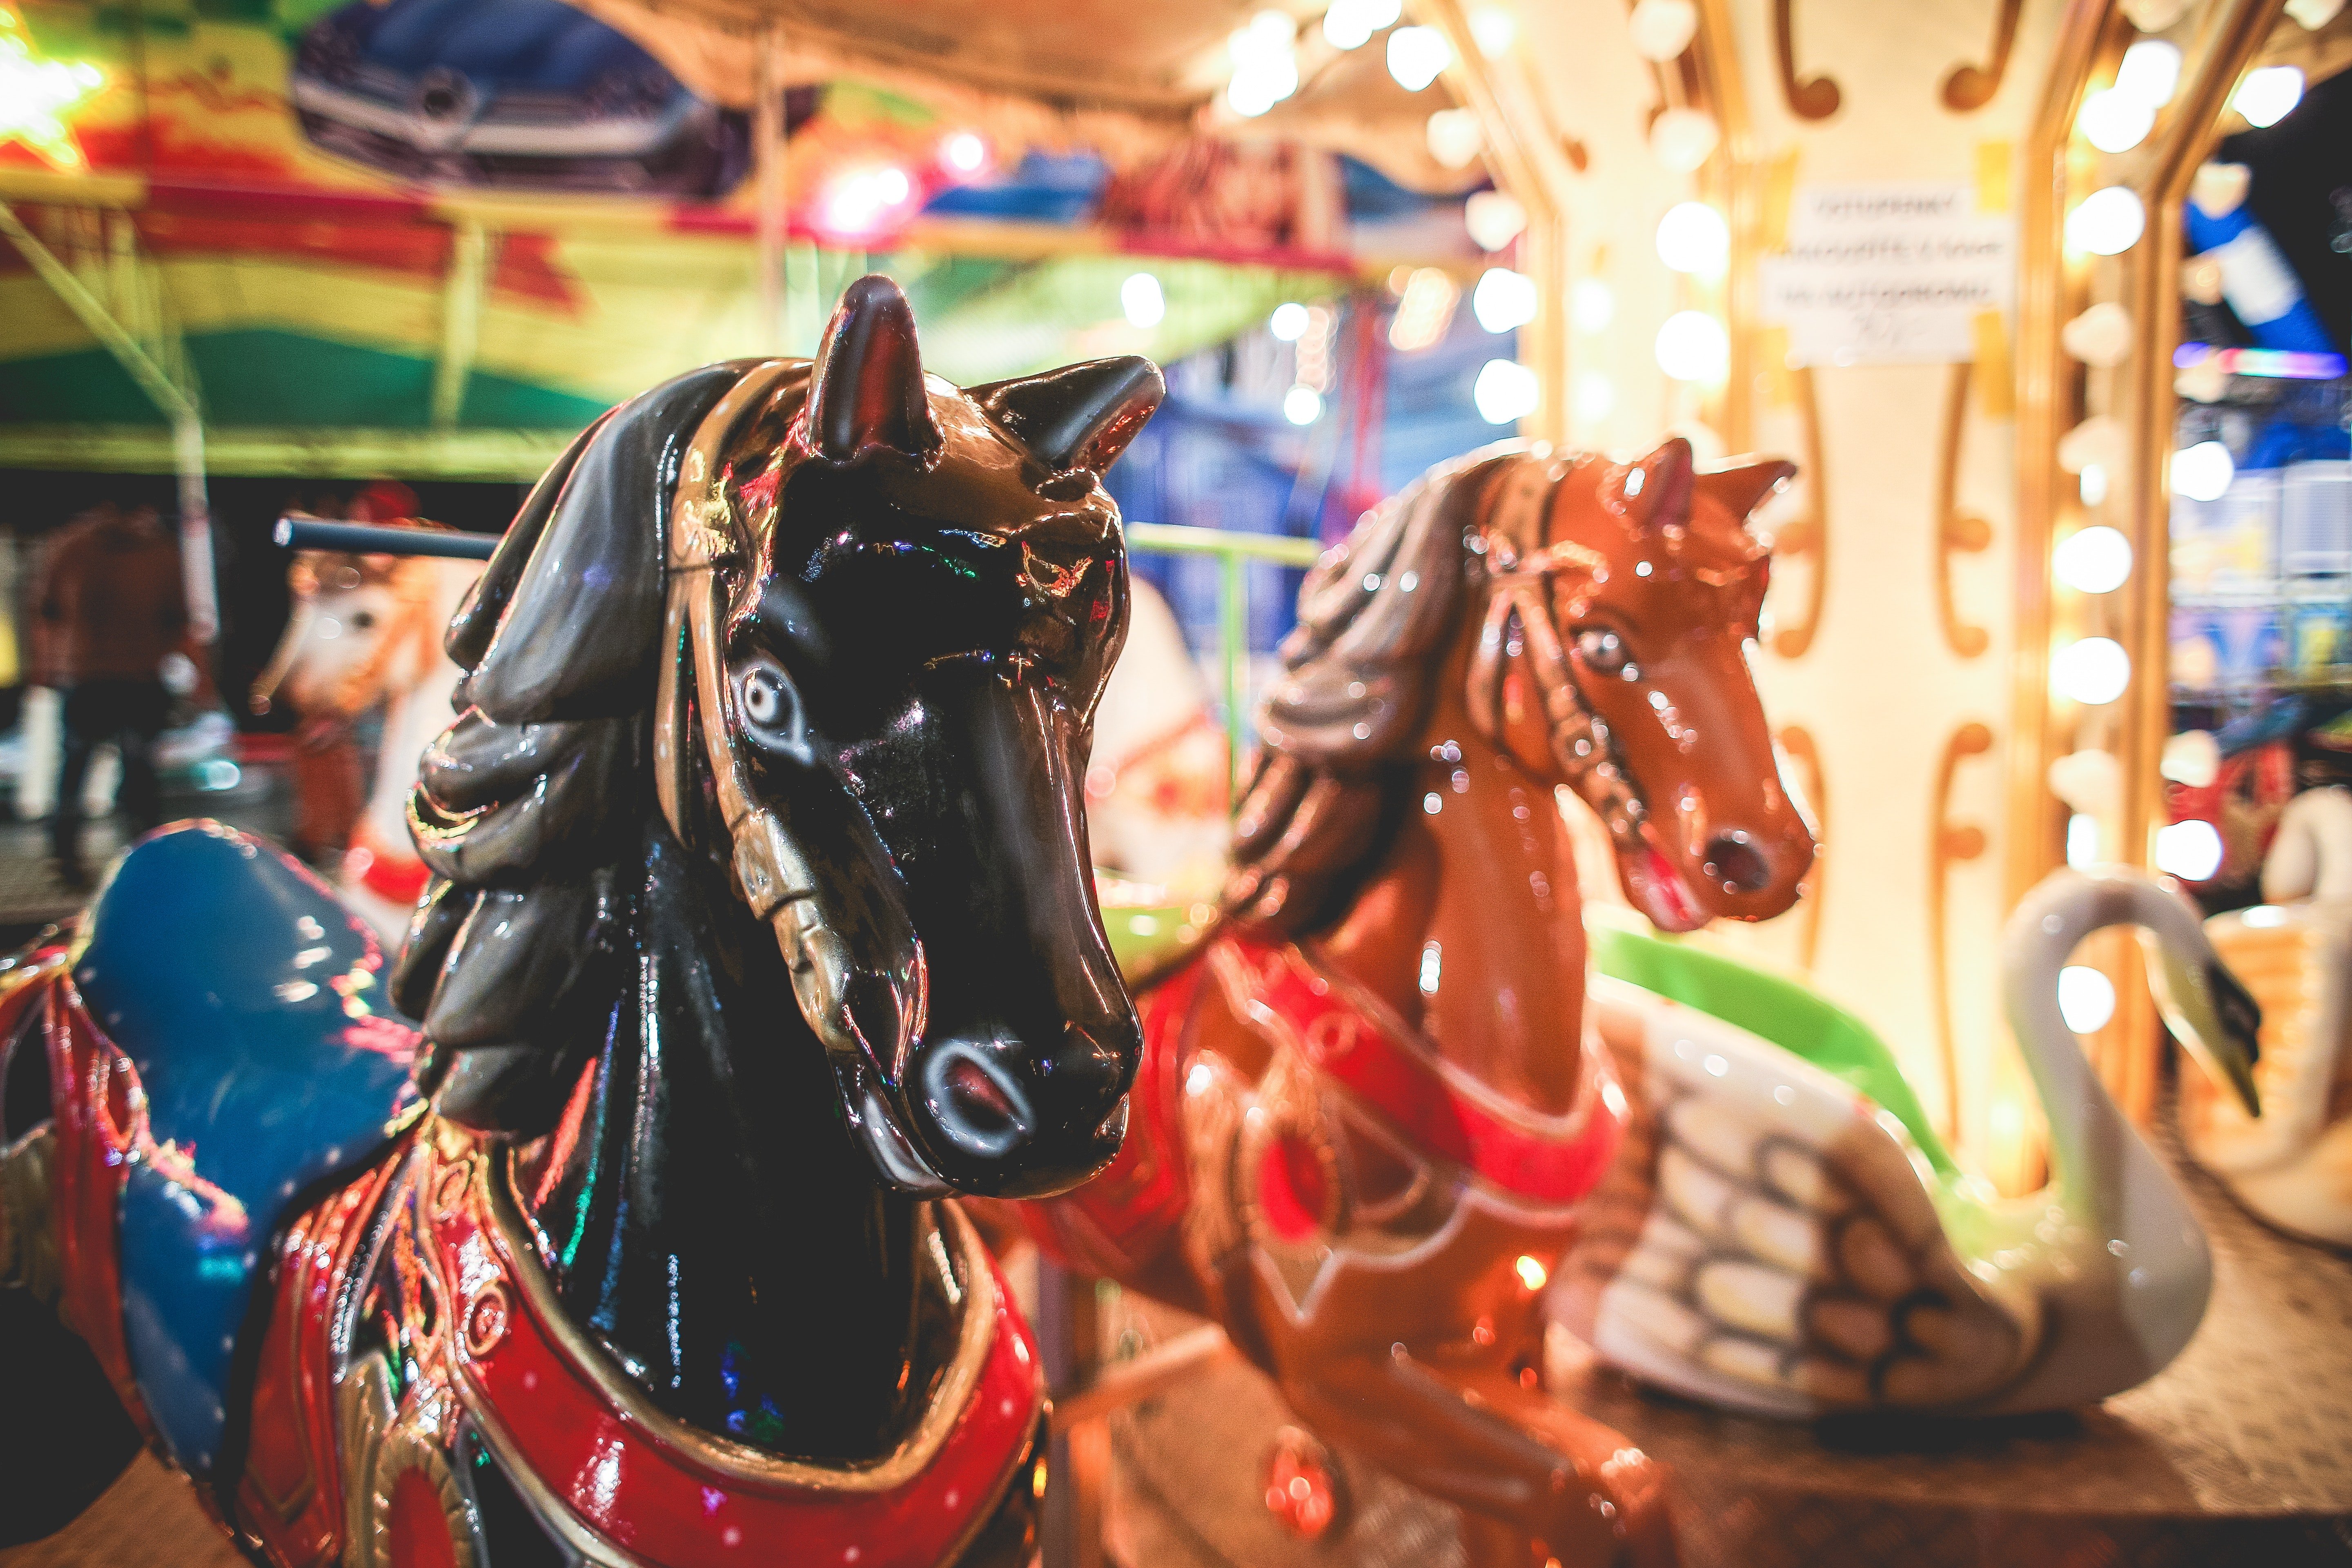 Kevin enjoyed the carousel at the amusement park. | Source: Pexels 